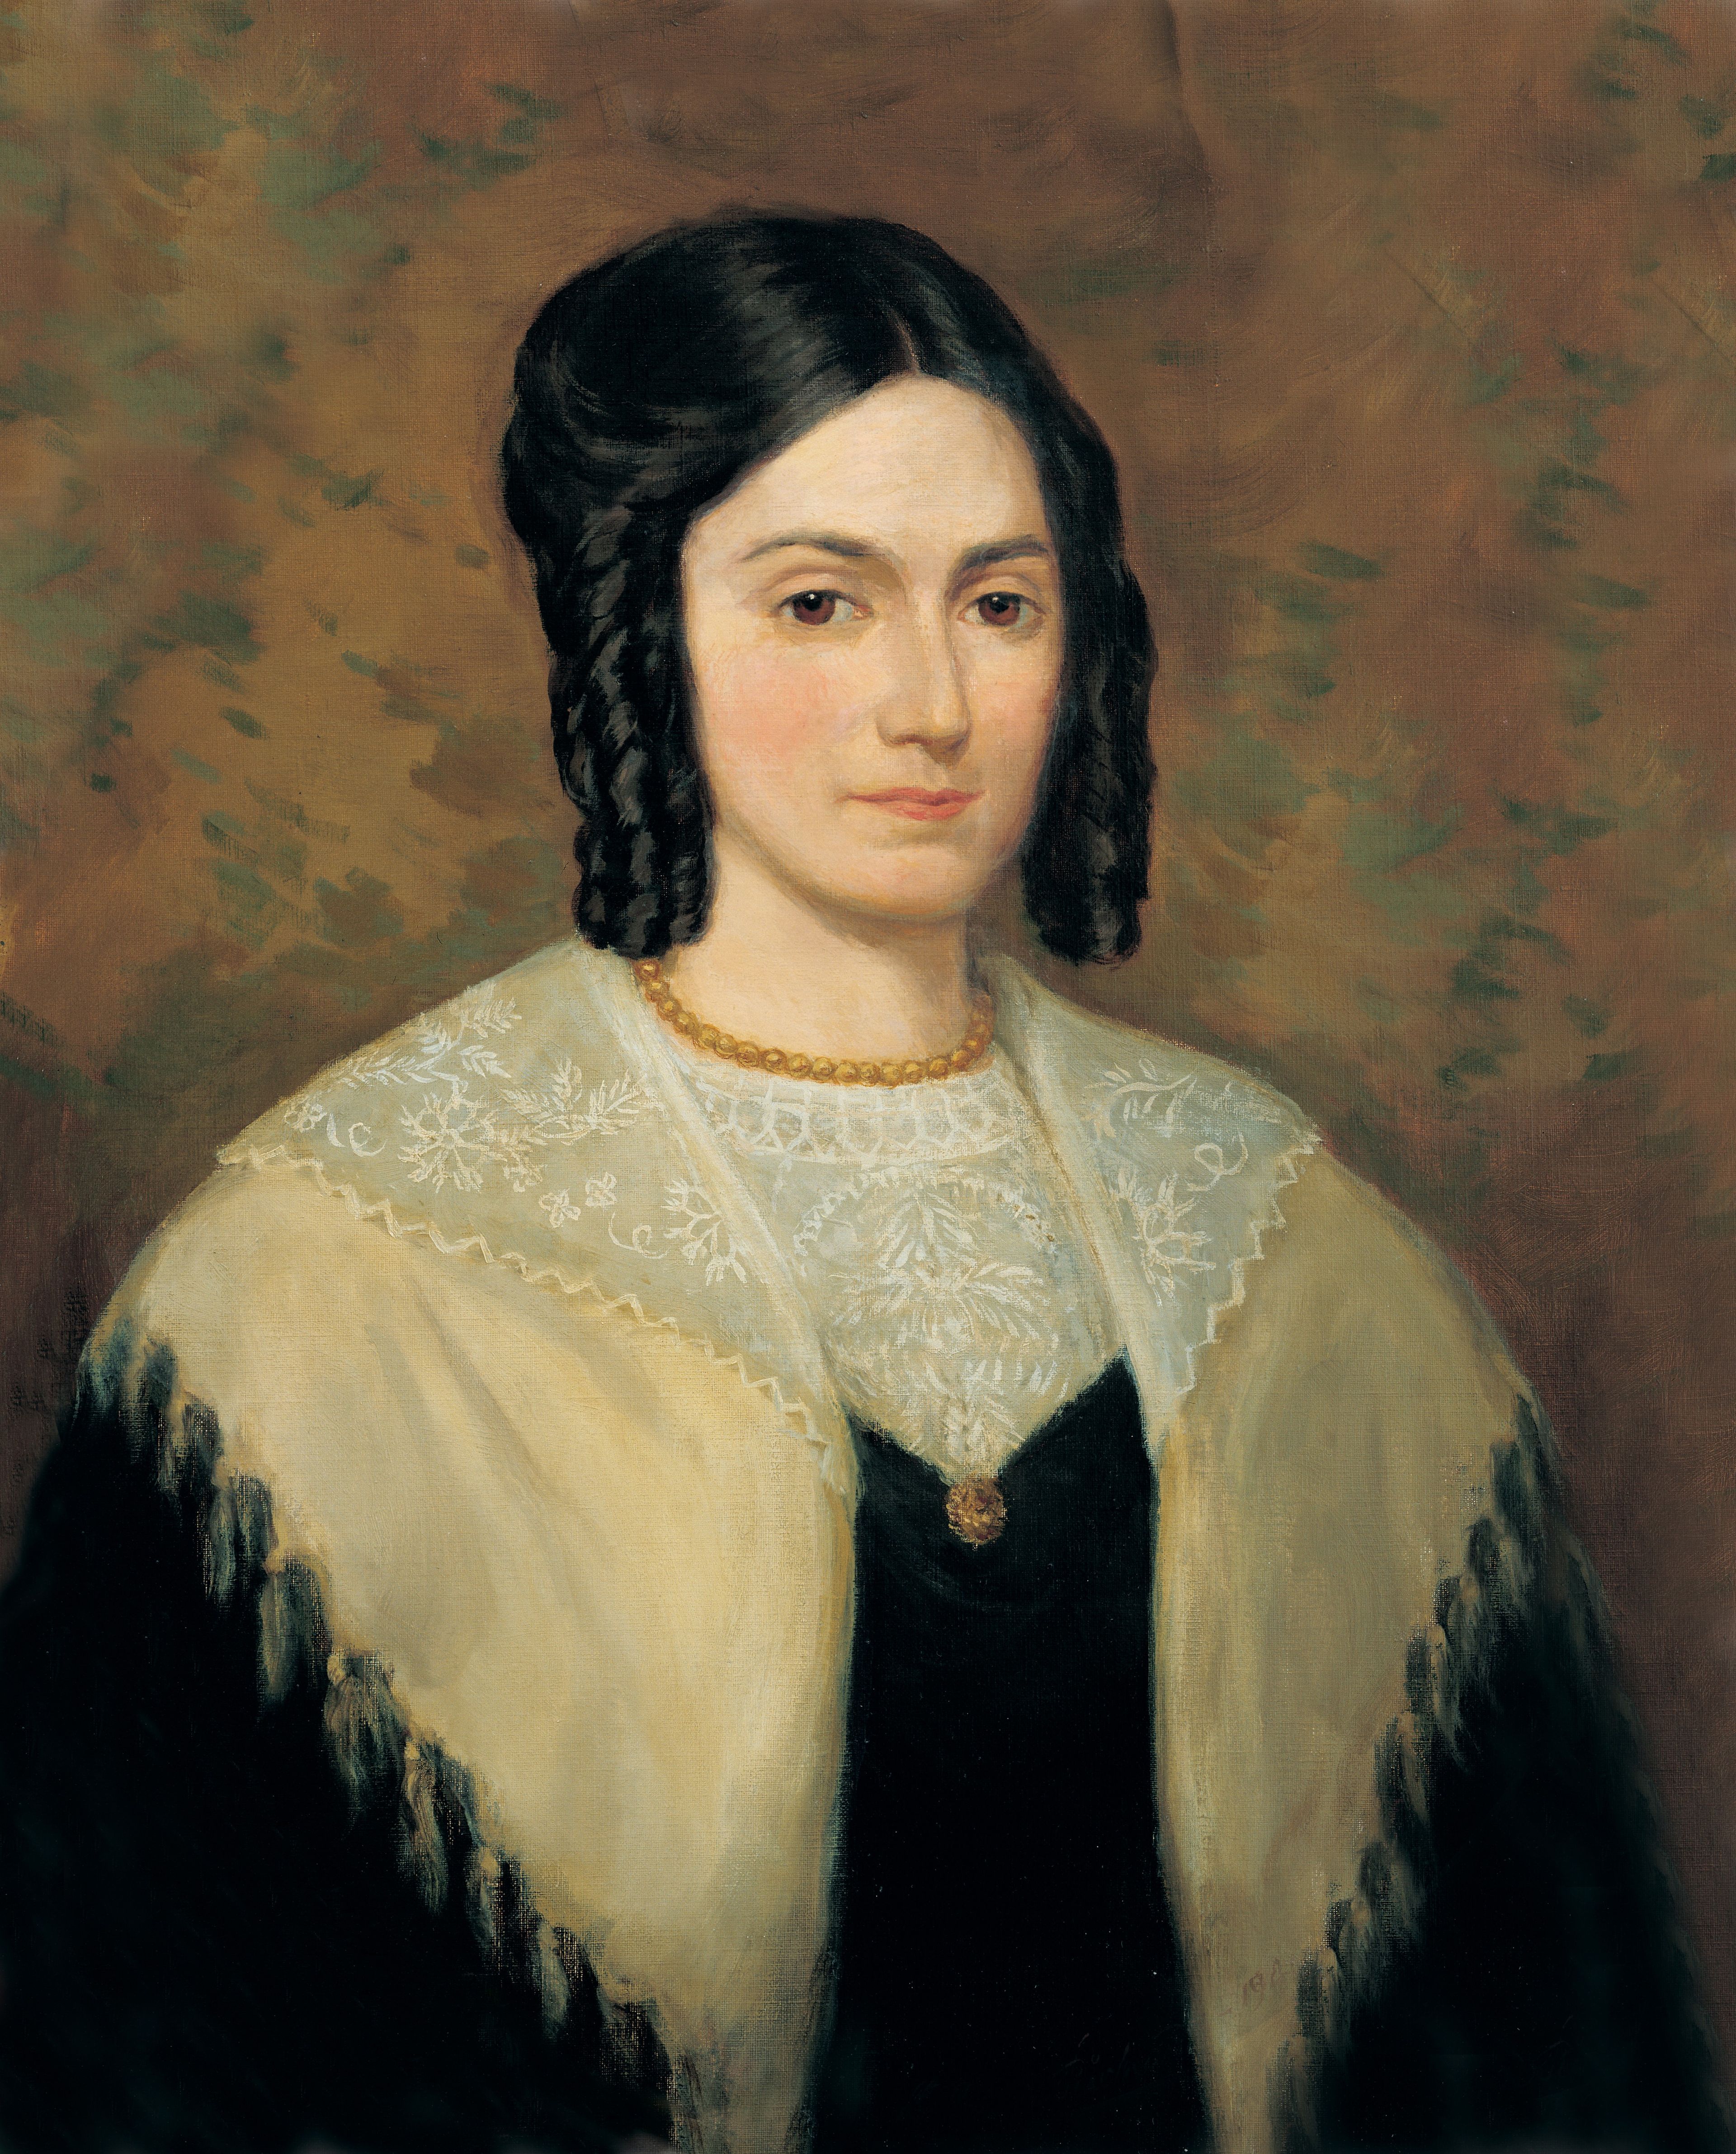 Emma Smith (Emma Hale Smith), by Lee Greene Richards (62509); GAK 405; GAB 88; Primary manual 5-22; Doctrine and Covenants 25. Emma Smith was the first Relief Society General President, serving from 1842 to 1844.